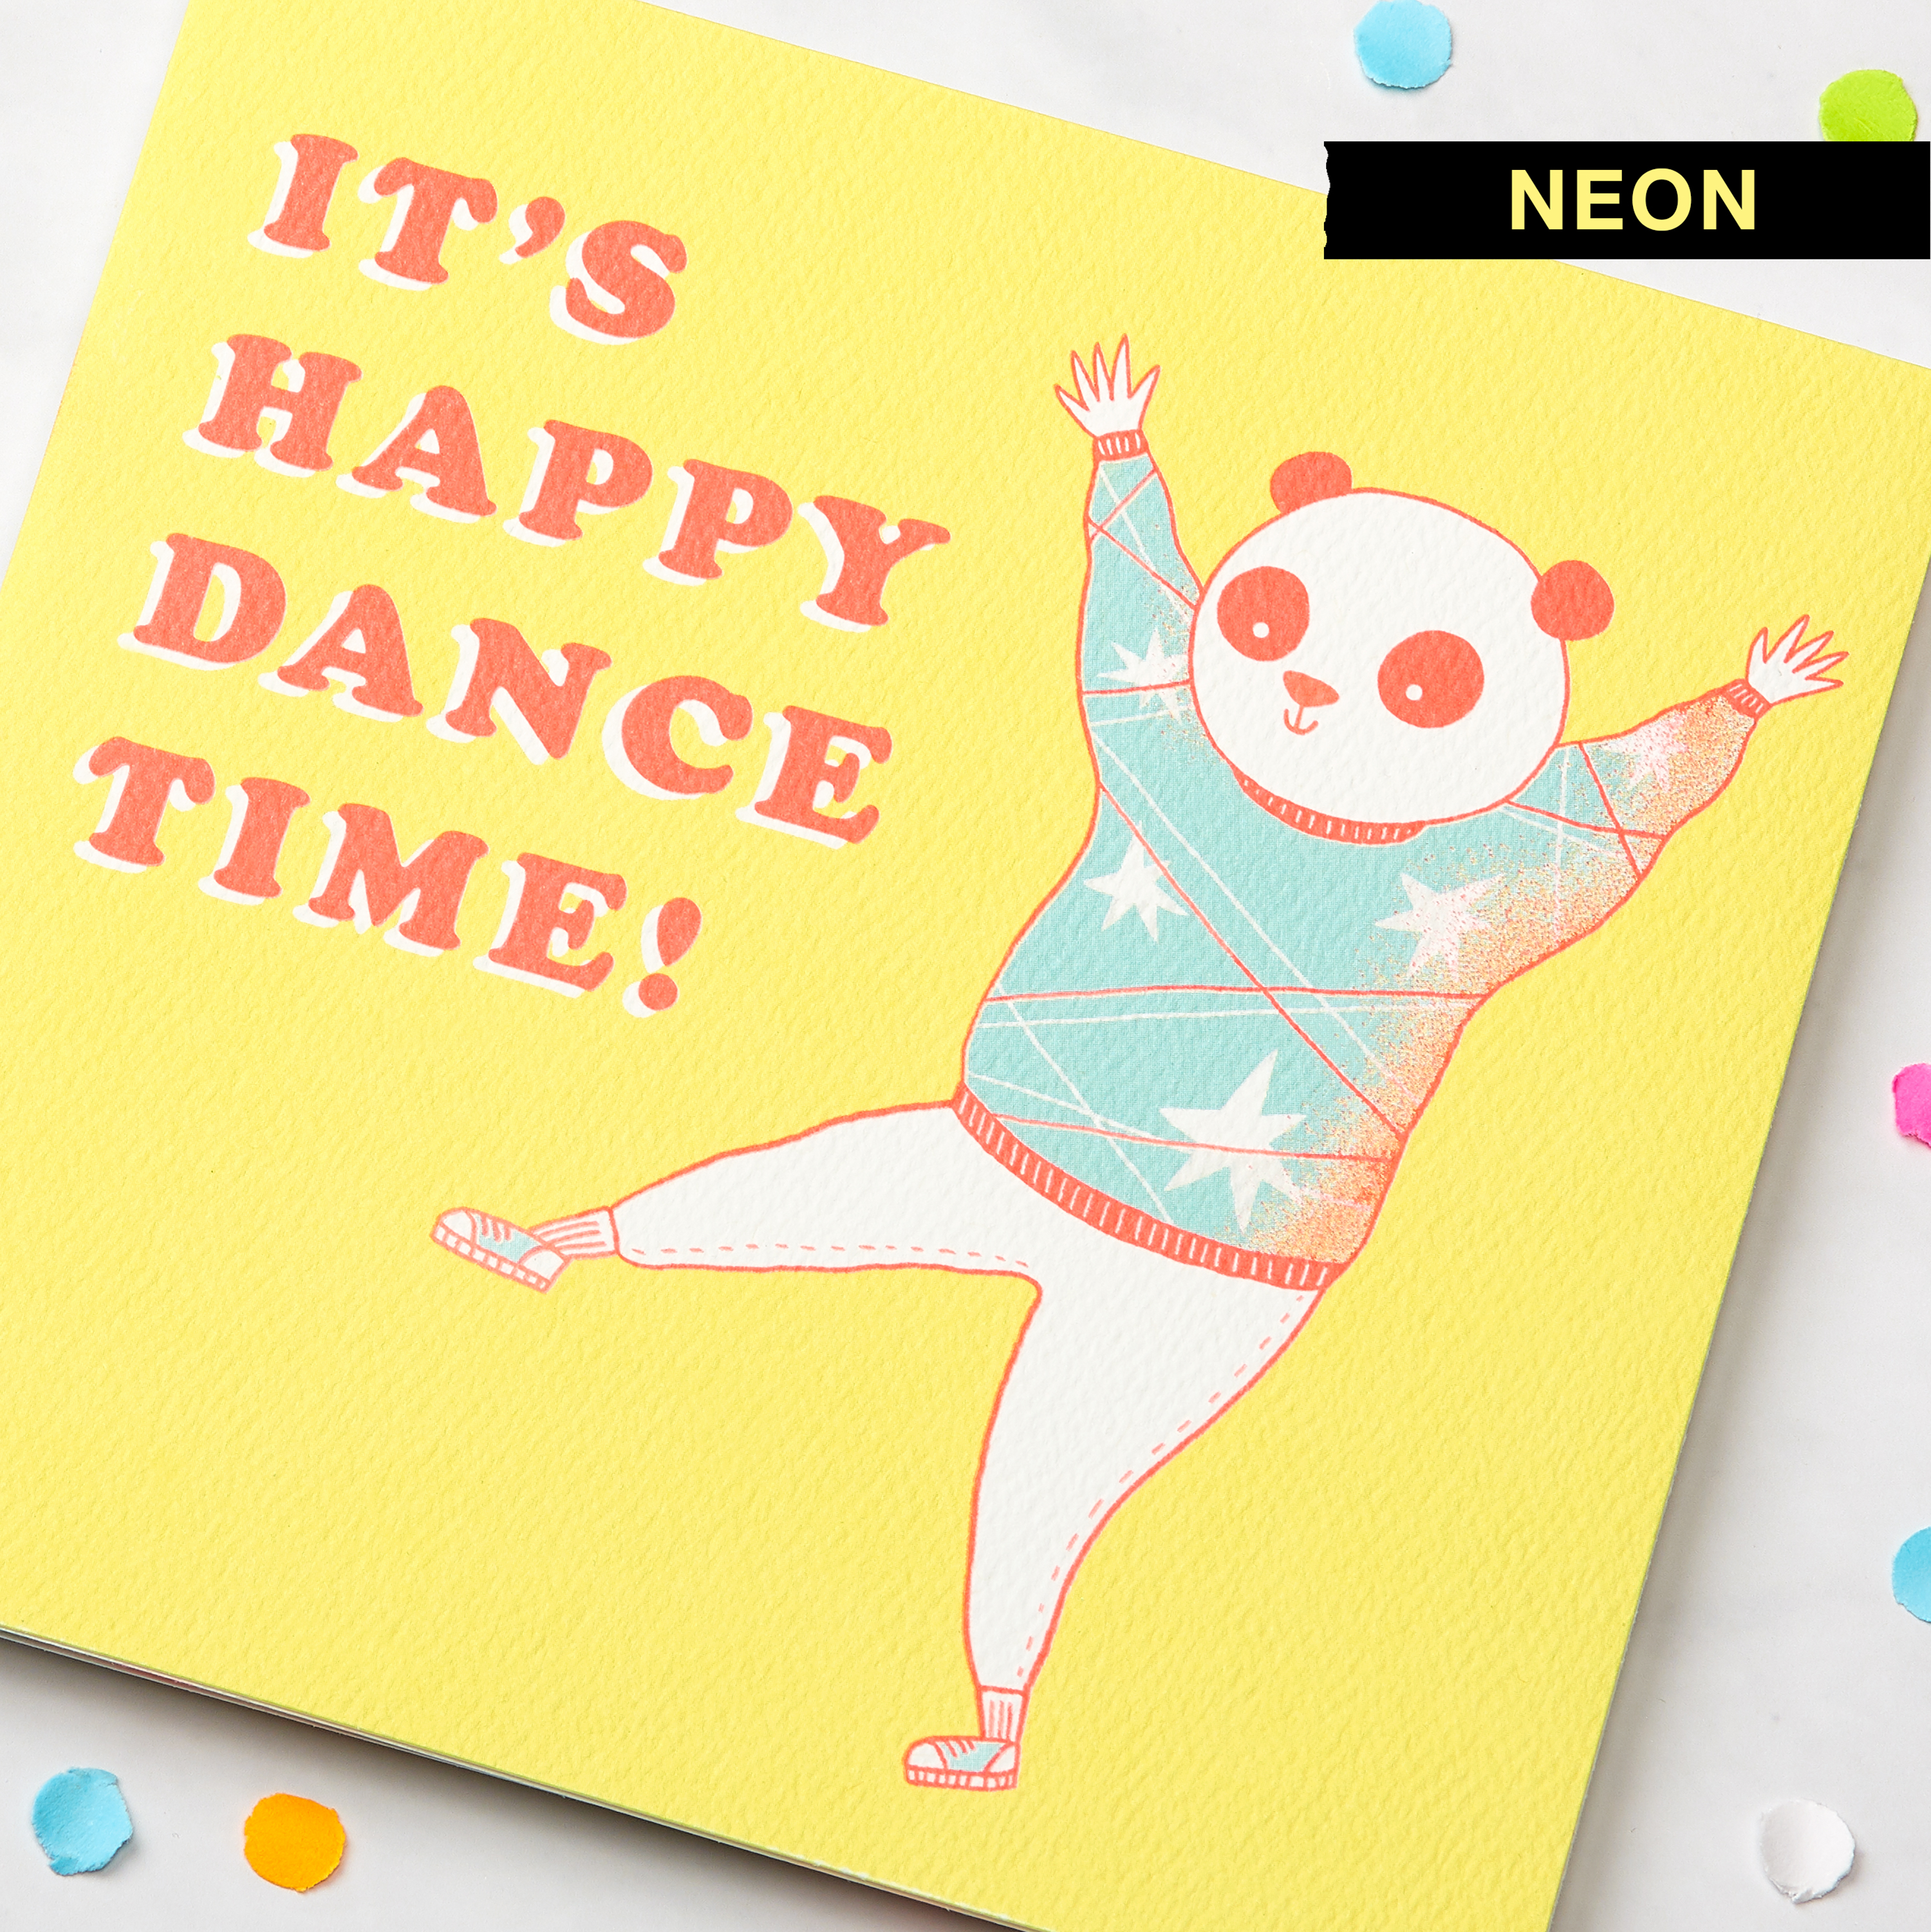 Happy Dance Greeting Card - Birthday, Thinking of You, Encouragement, Congratulations image